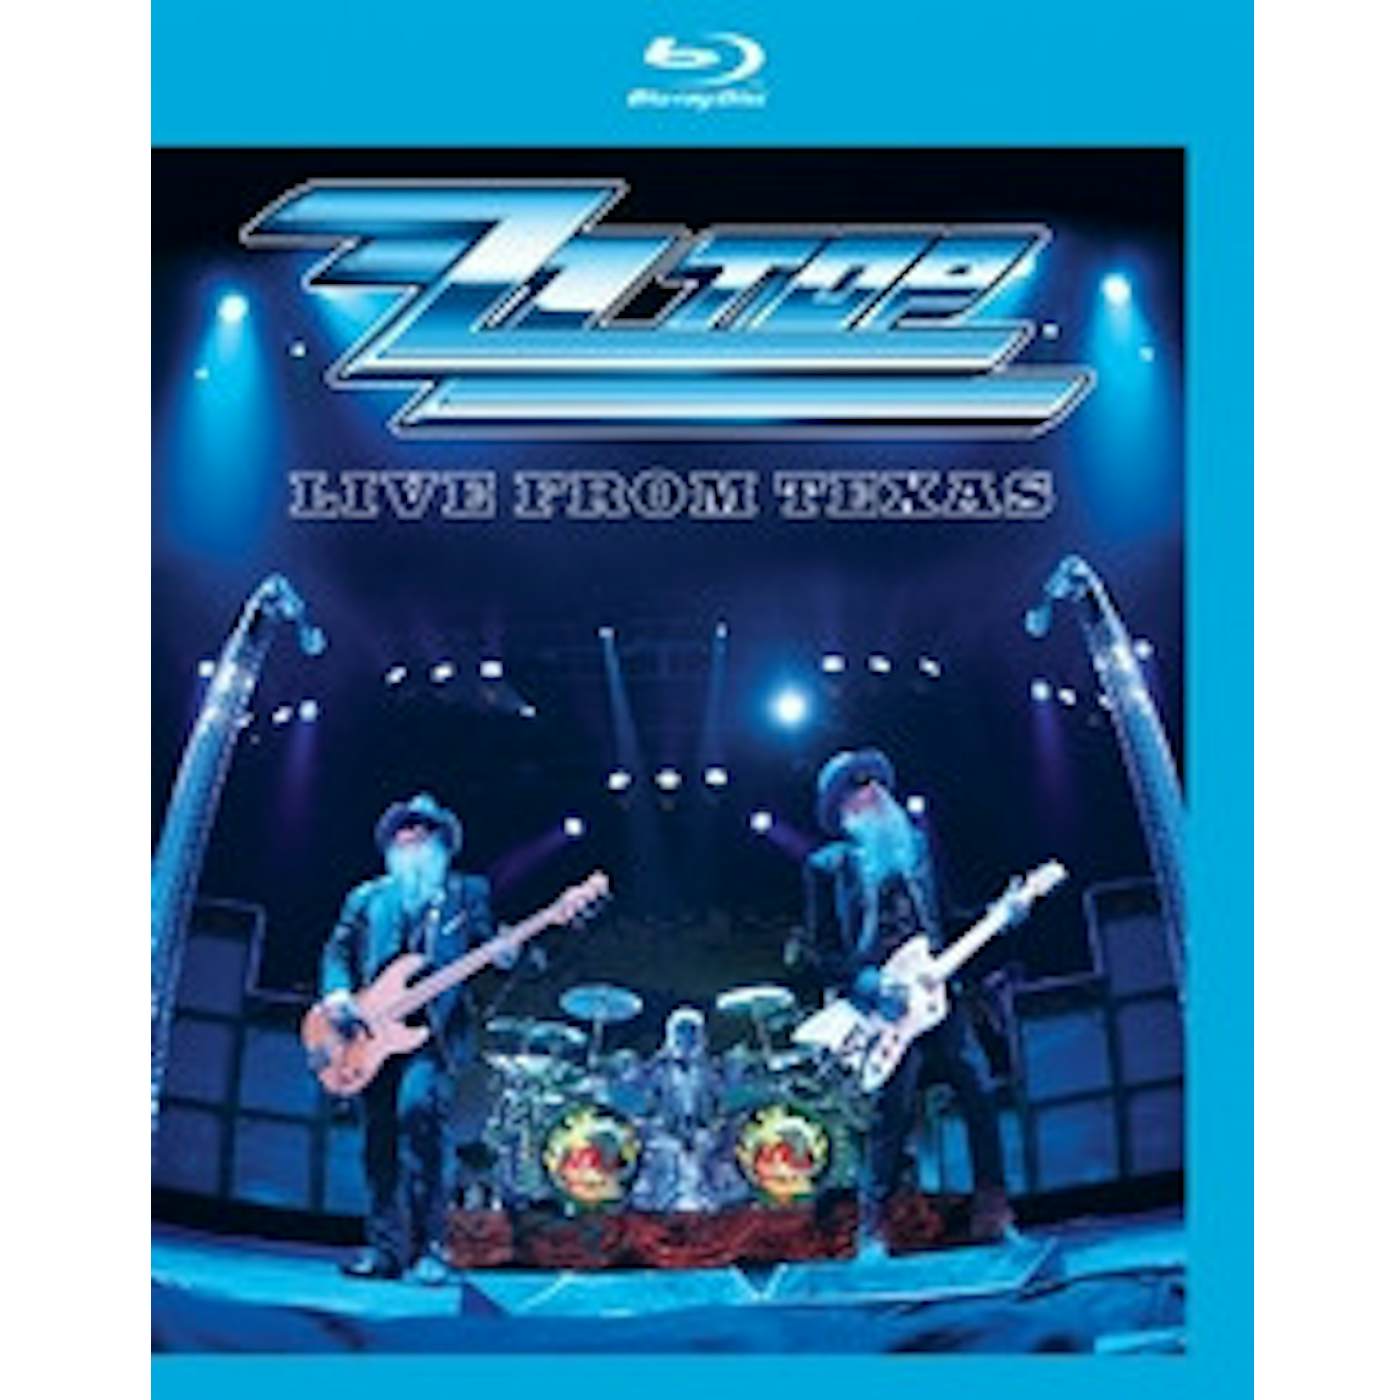 ZZ Top LIVE FROM TEXAS DVD